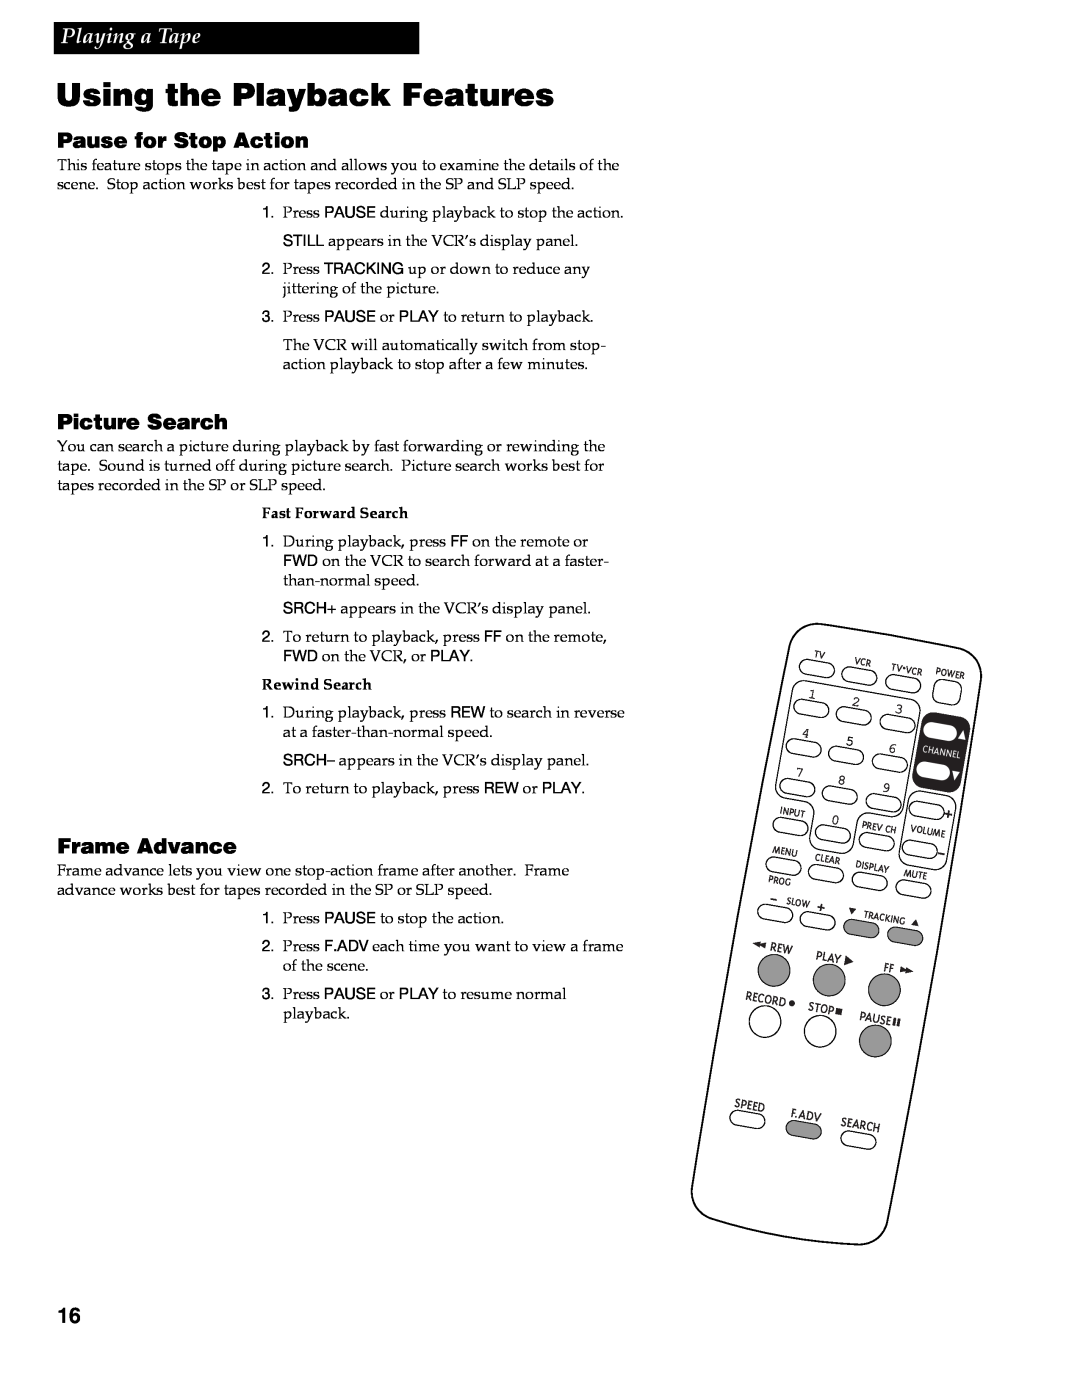 RCA VR618HF manual Pause for Stop Action, Picture Search, Frame Advance, Using the Playback Features, Playing a Tape 